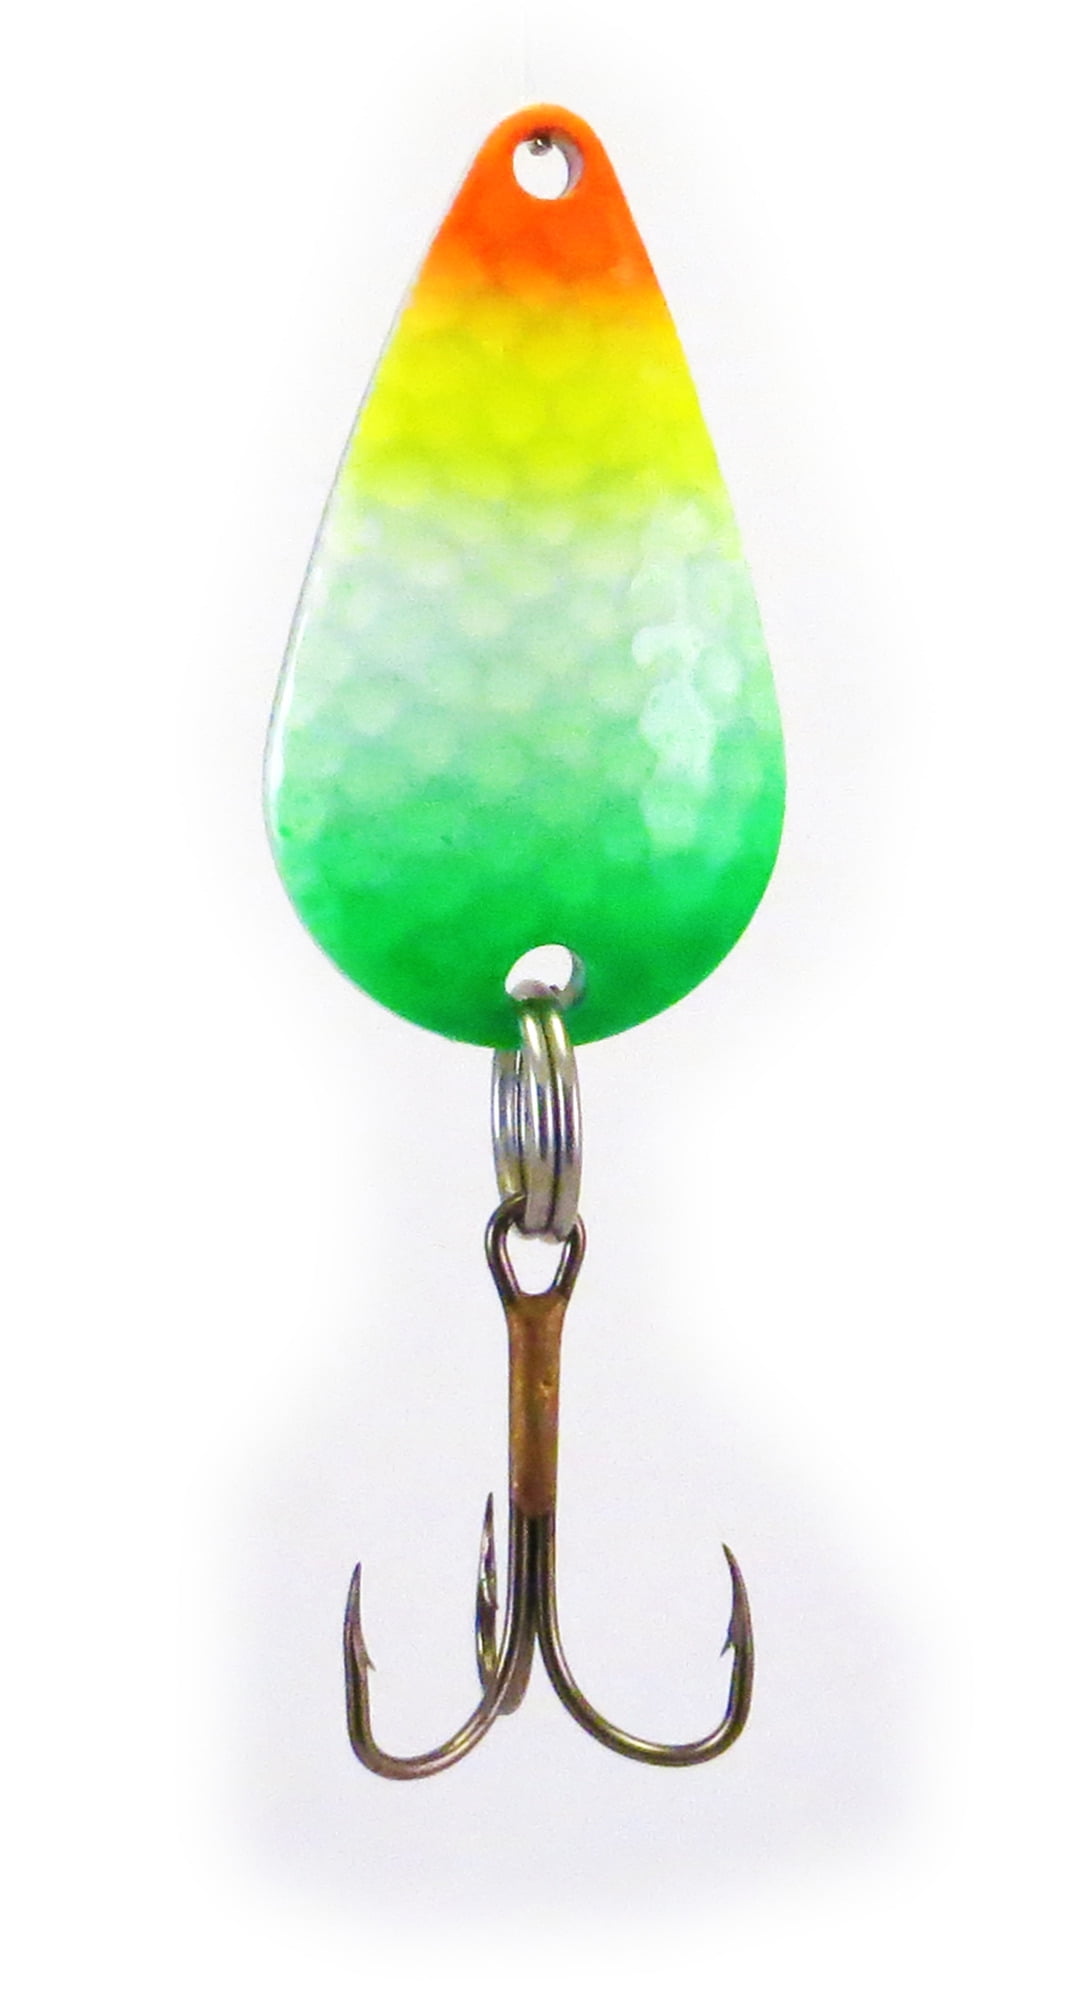 Eppinger Dardevle Fishing Lure Spoon 2/5 oz With Treble Hook Choice of Colors 